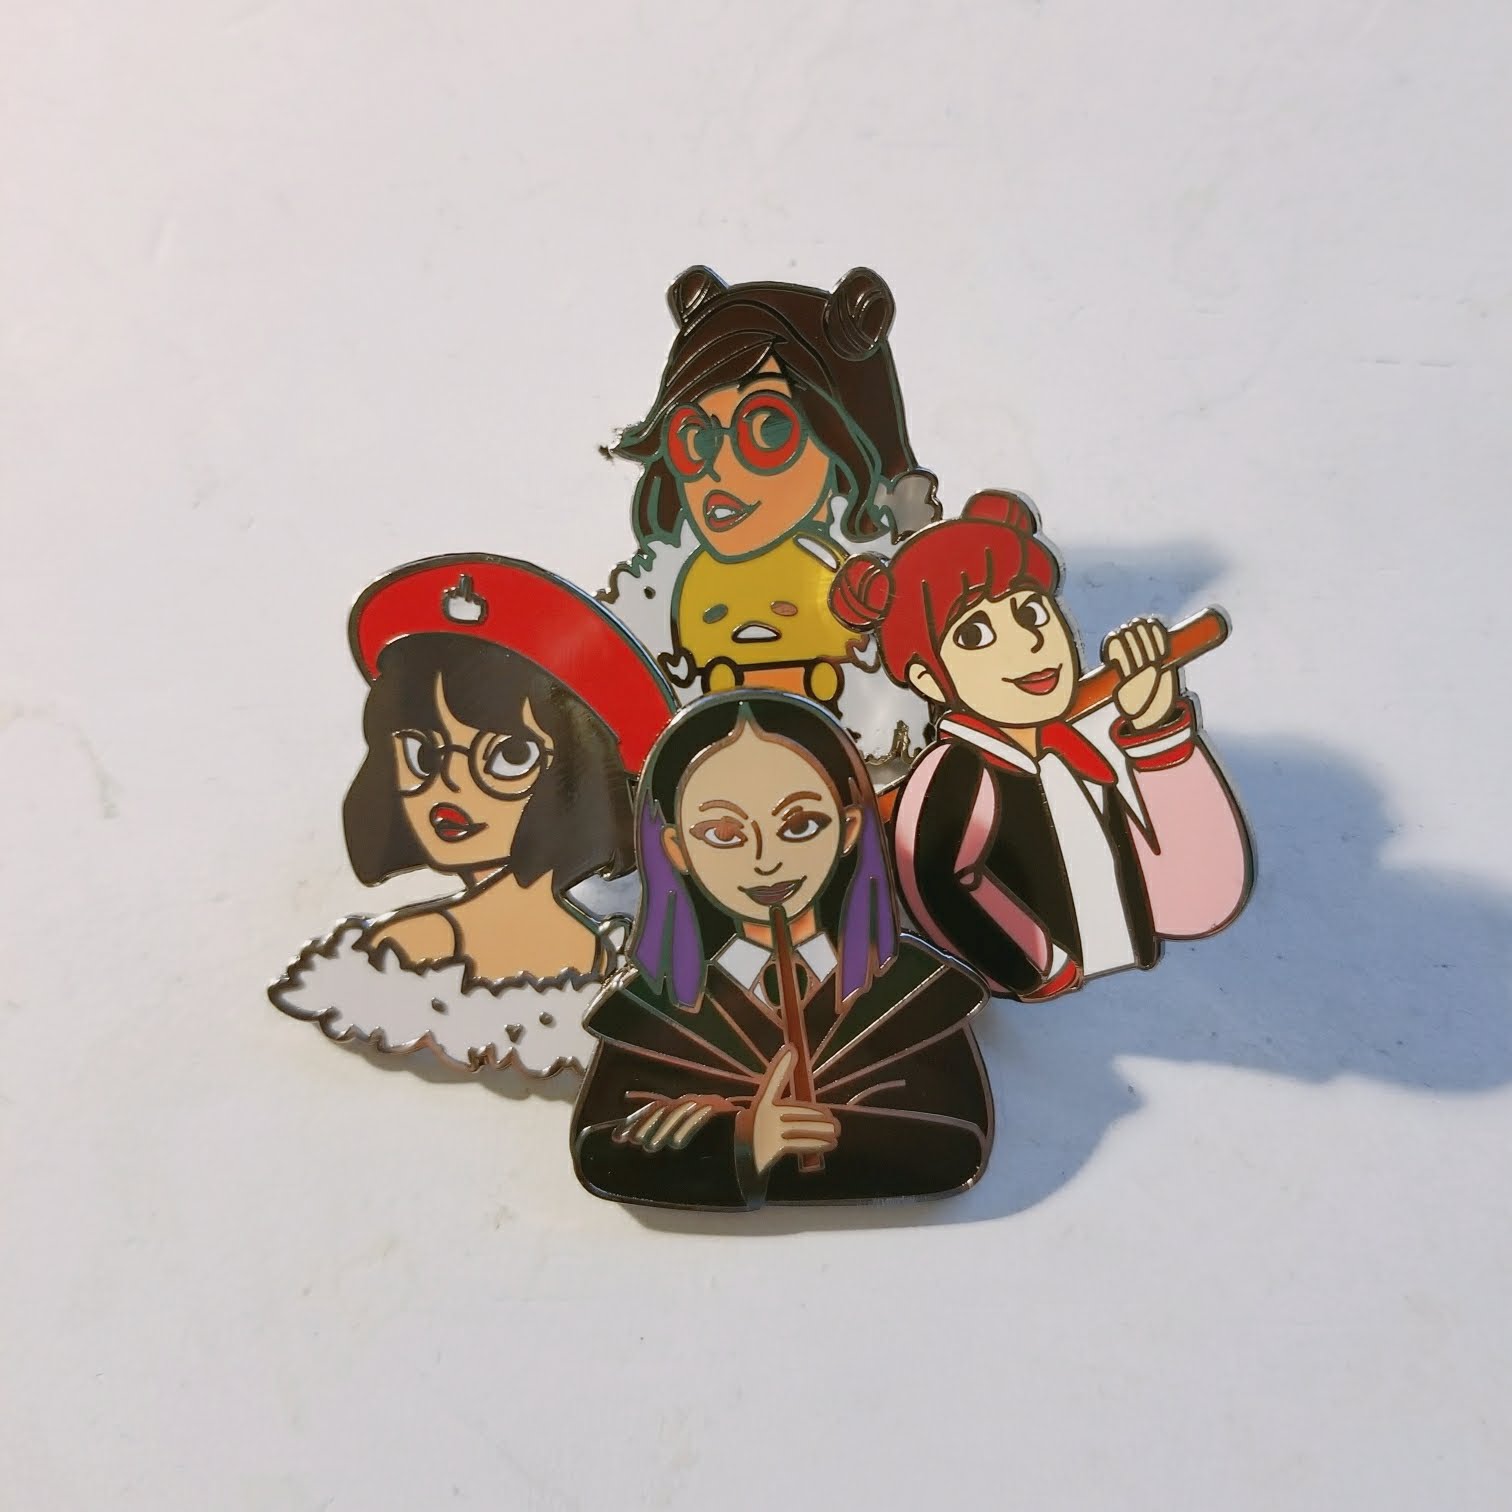  I recently worked to create some cloisonne or the hard enamel lapel pins that have been trending in the market lately. This batch is of a group of friends that dress up in cosplay. The art work and production management was all done by me.  Helping 